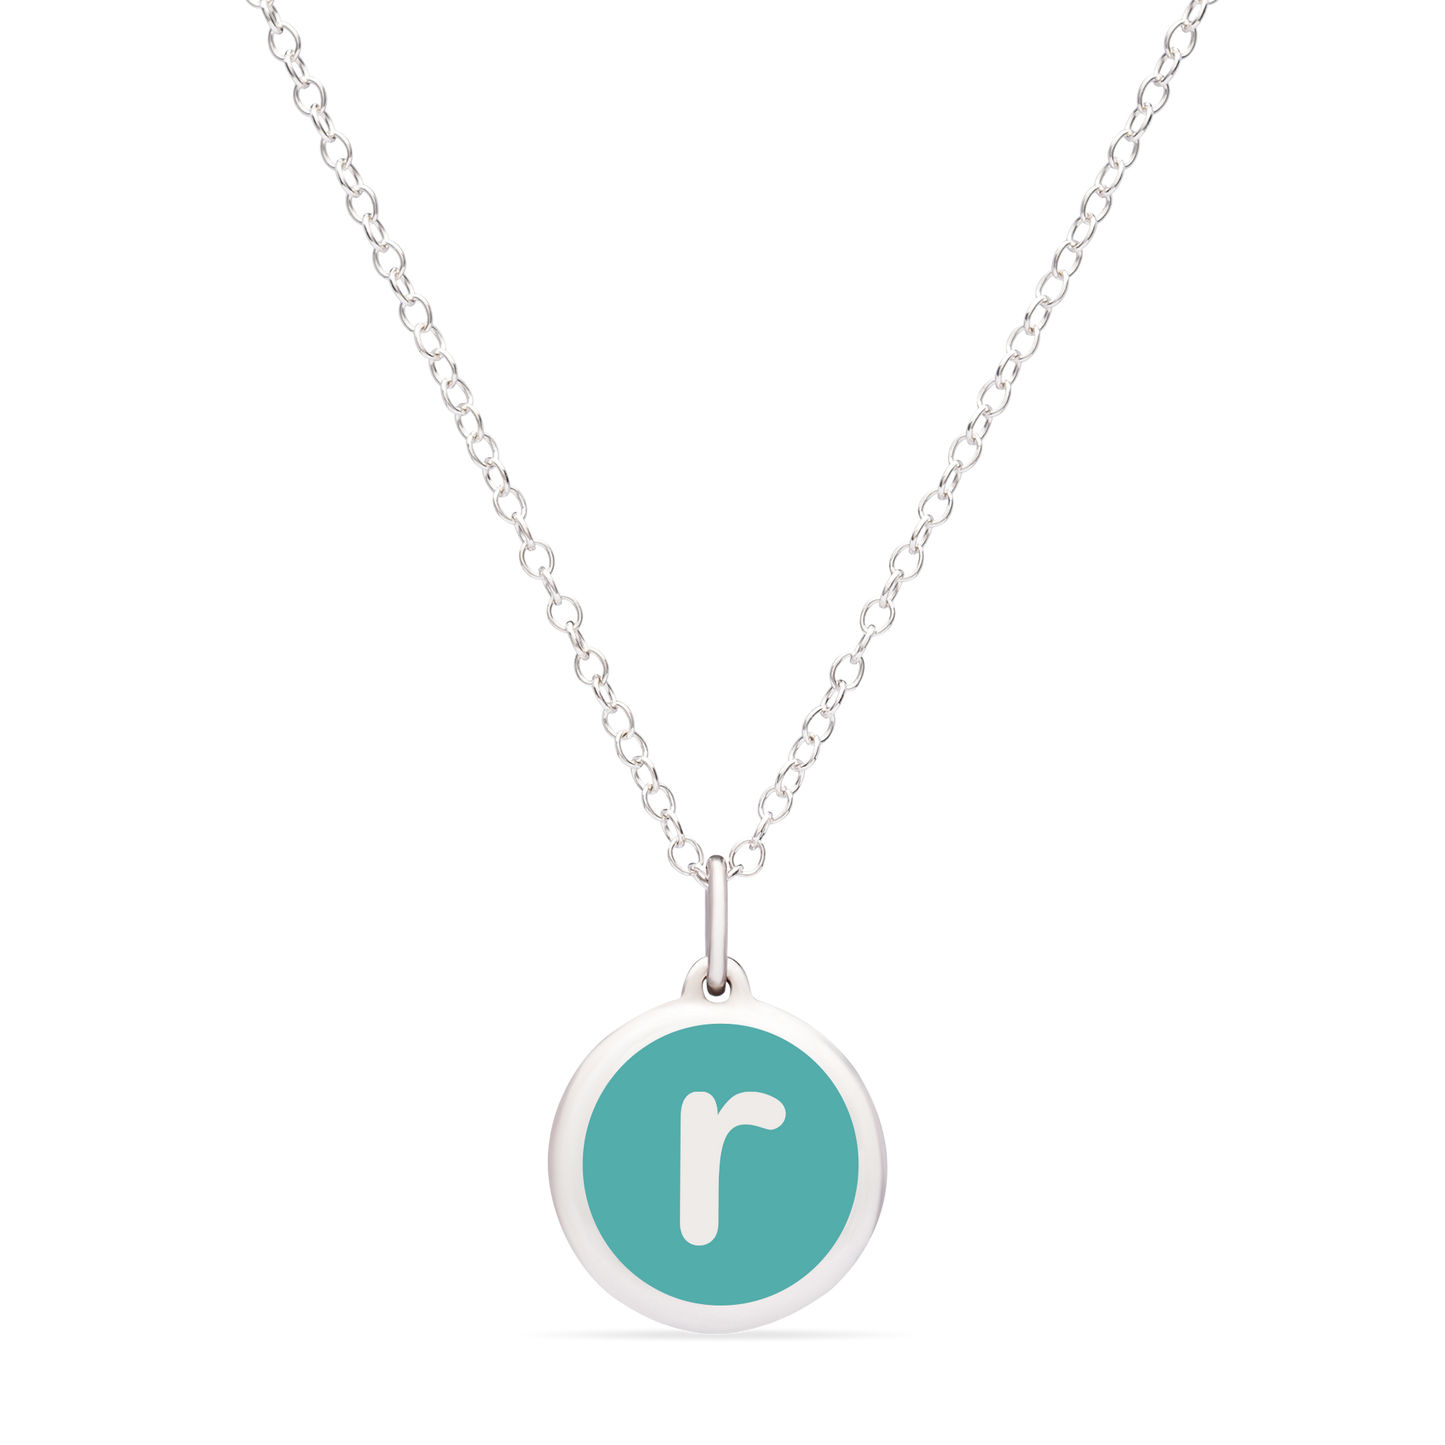 MINI INITIAL 'r' CHARM sterling silver with rhodium plate